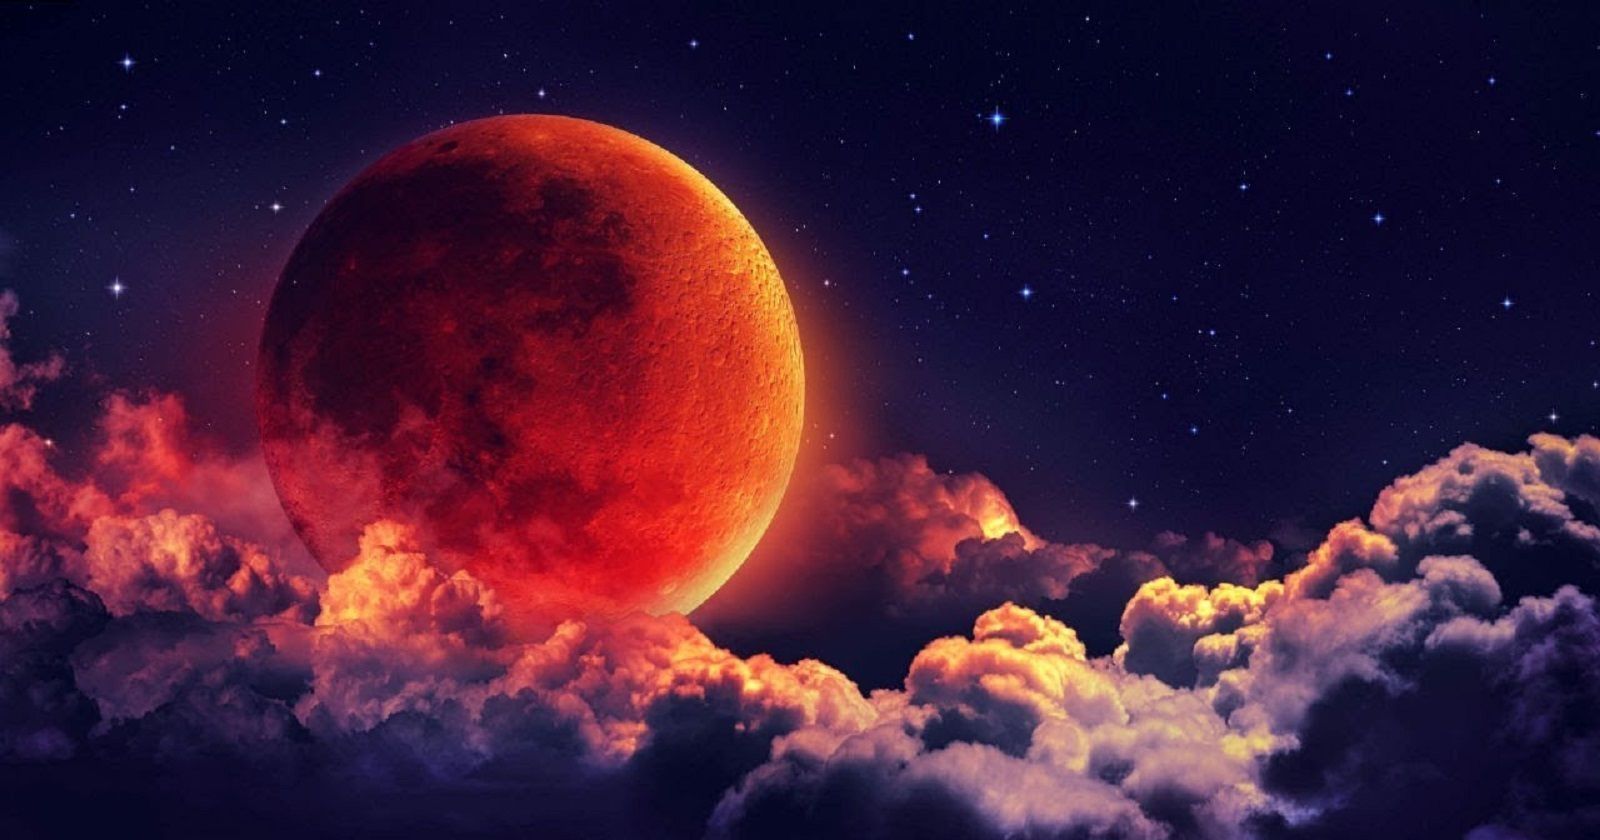 Everything You Need To Know About Tonight's Super Blue Blood Moon - A